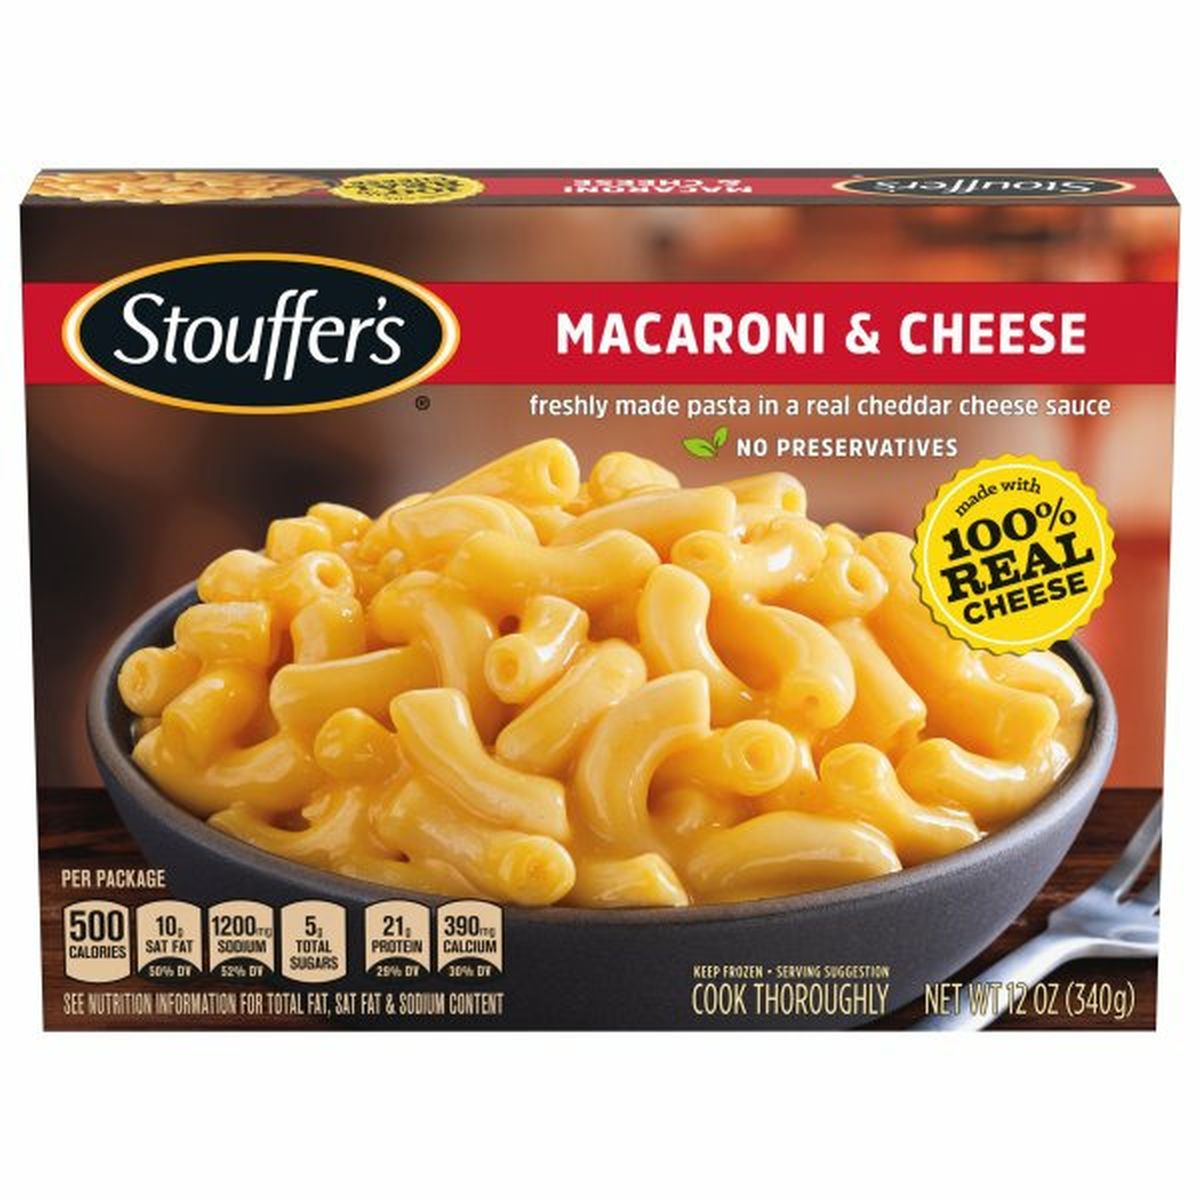 Calories in Stouffer's Macaroni & Cheese